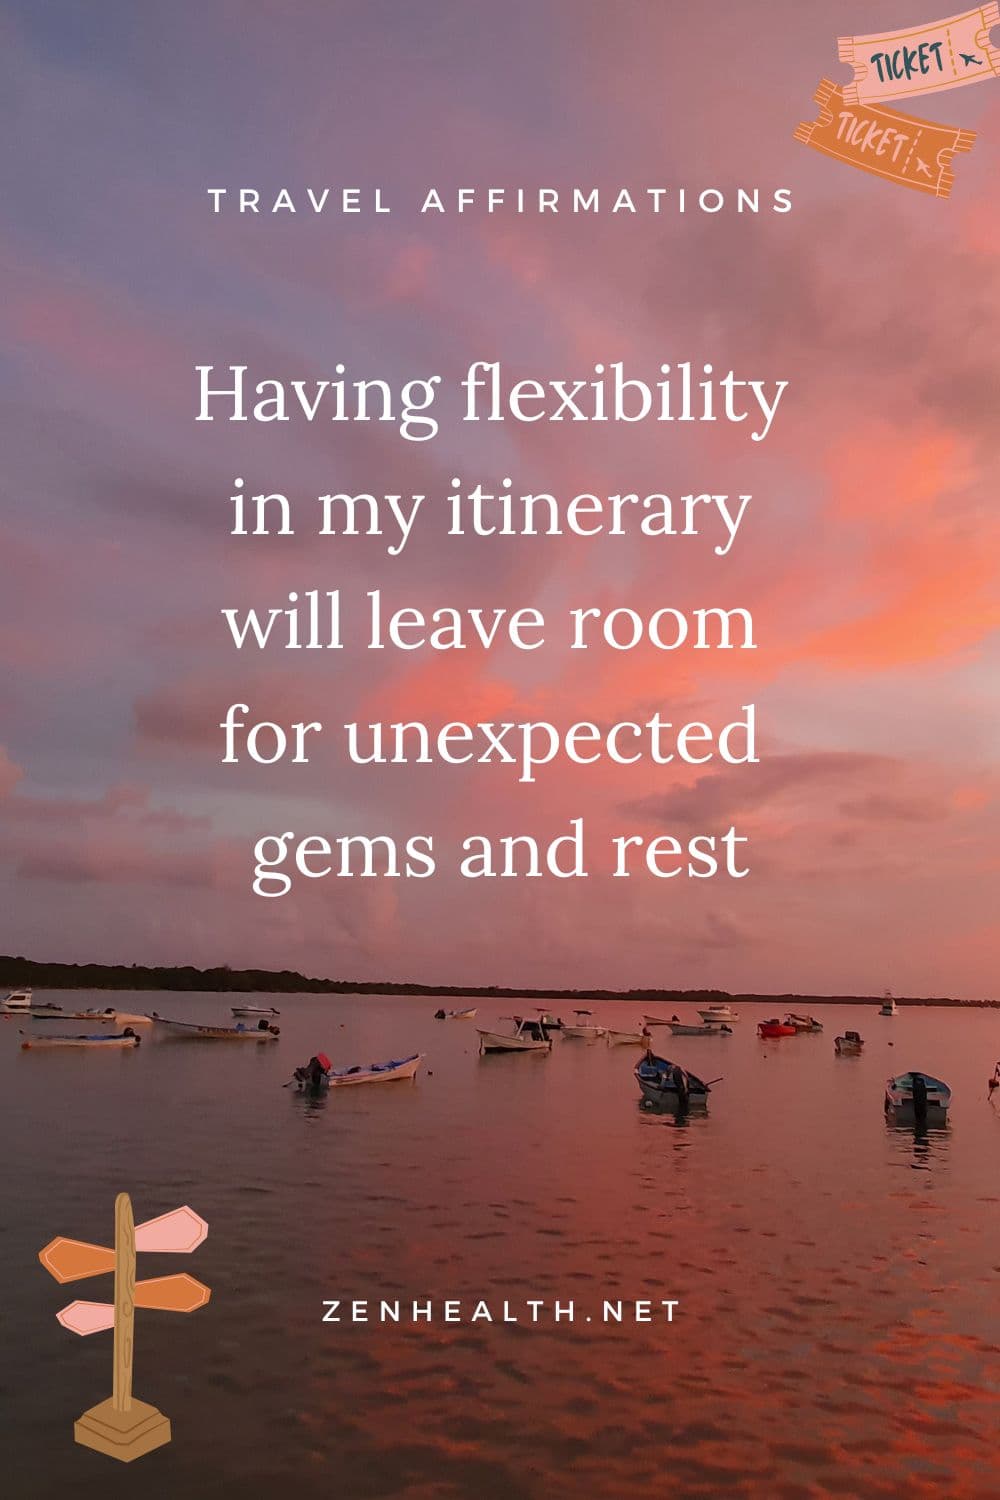 travel affirmations: Having flexibility in my itinerary will leave room for unexpected gems and rest